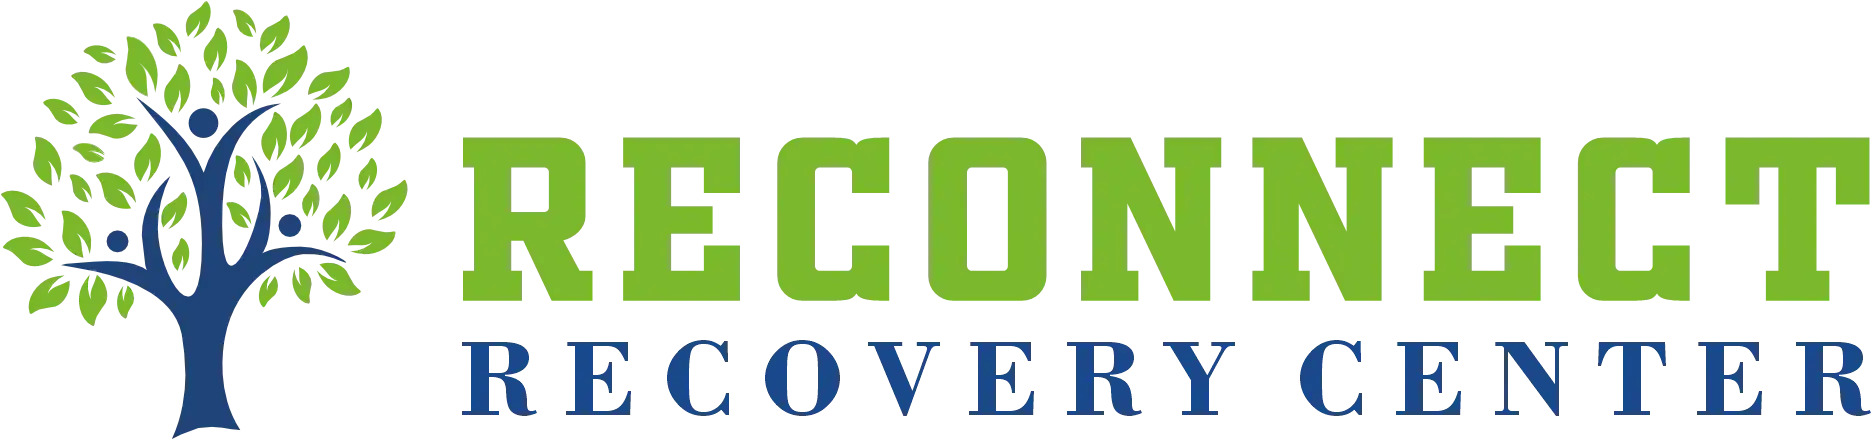 Company Logo For Reconnect Recovery Center California 1'